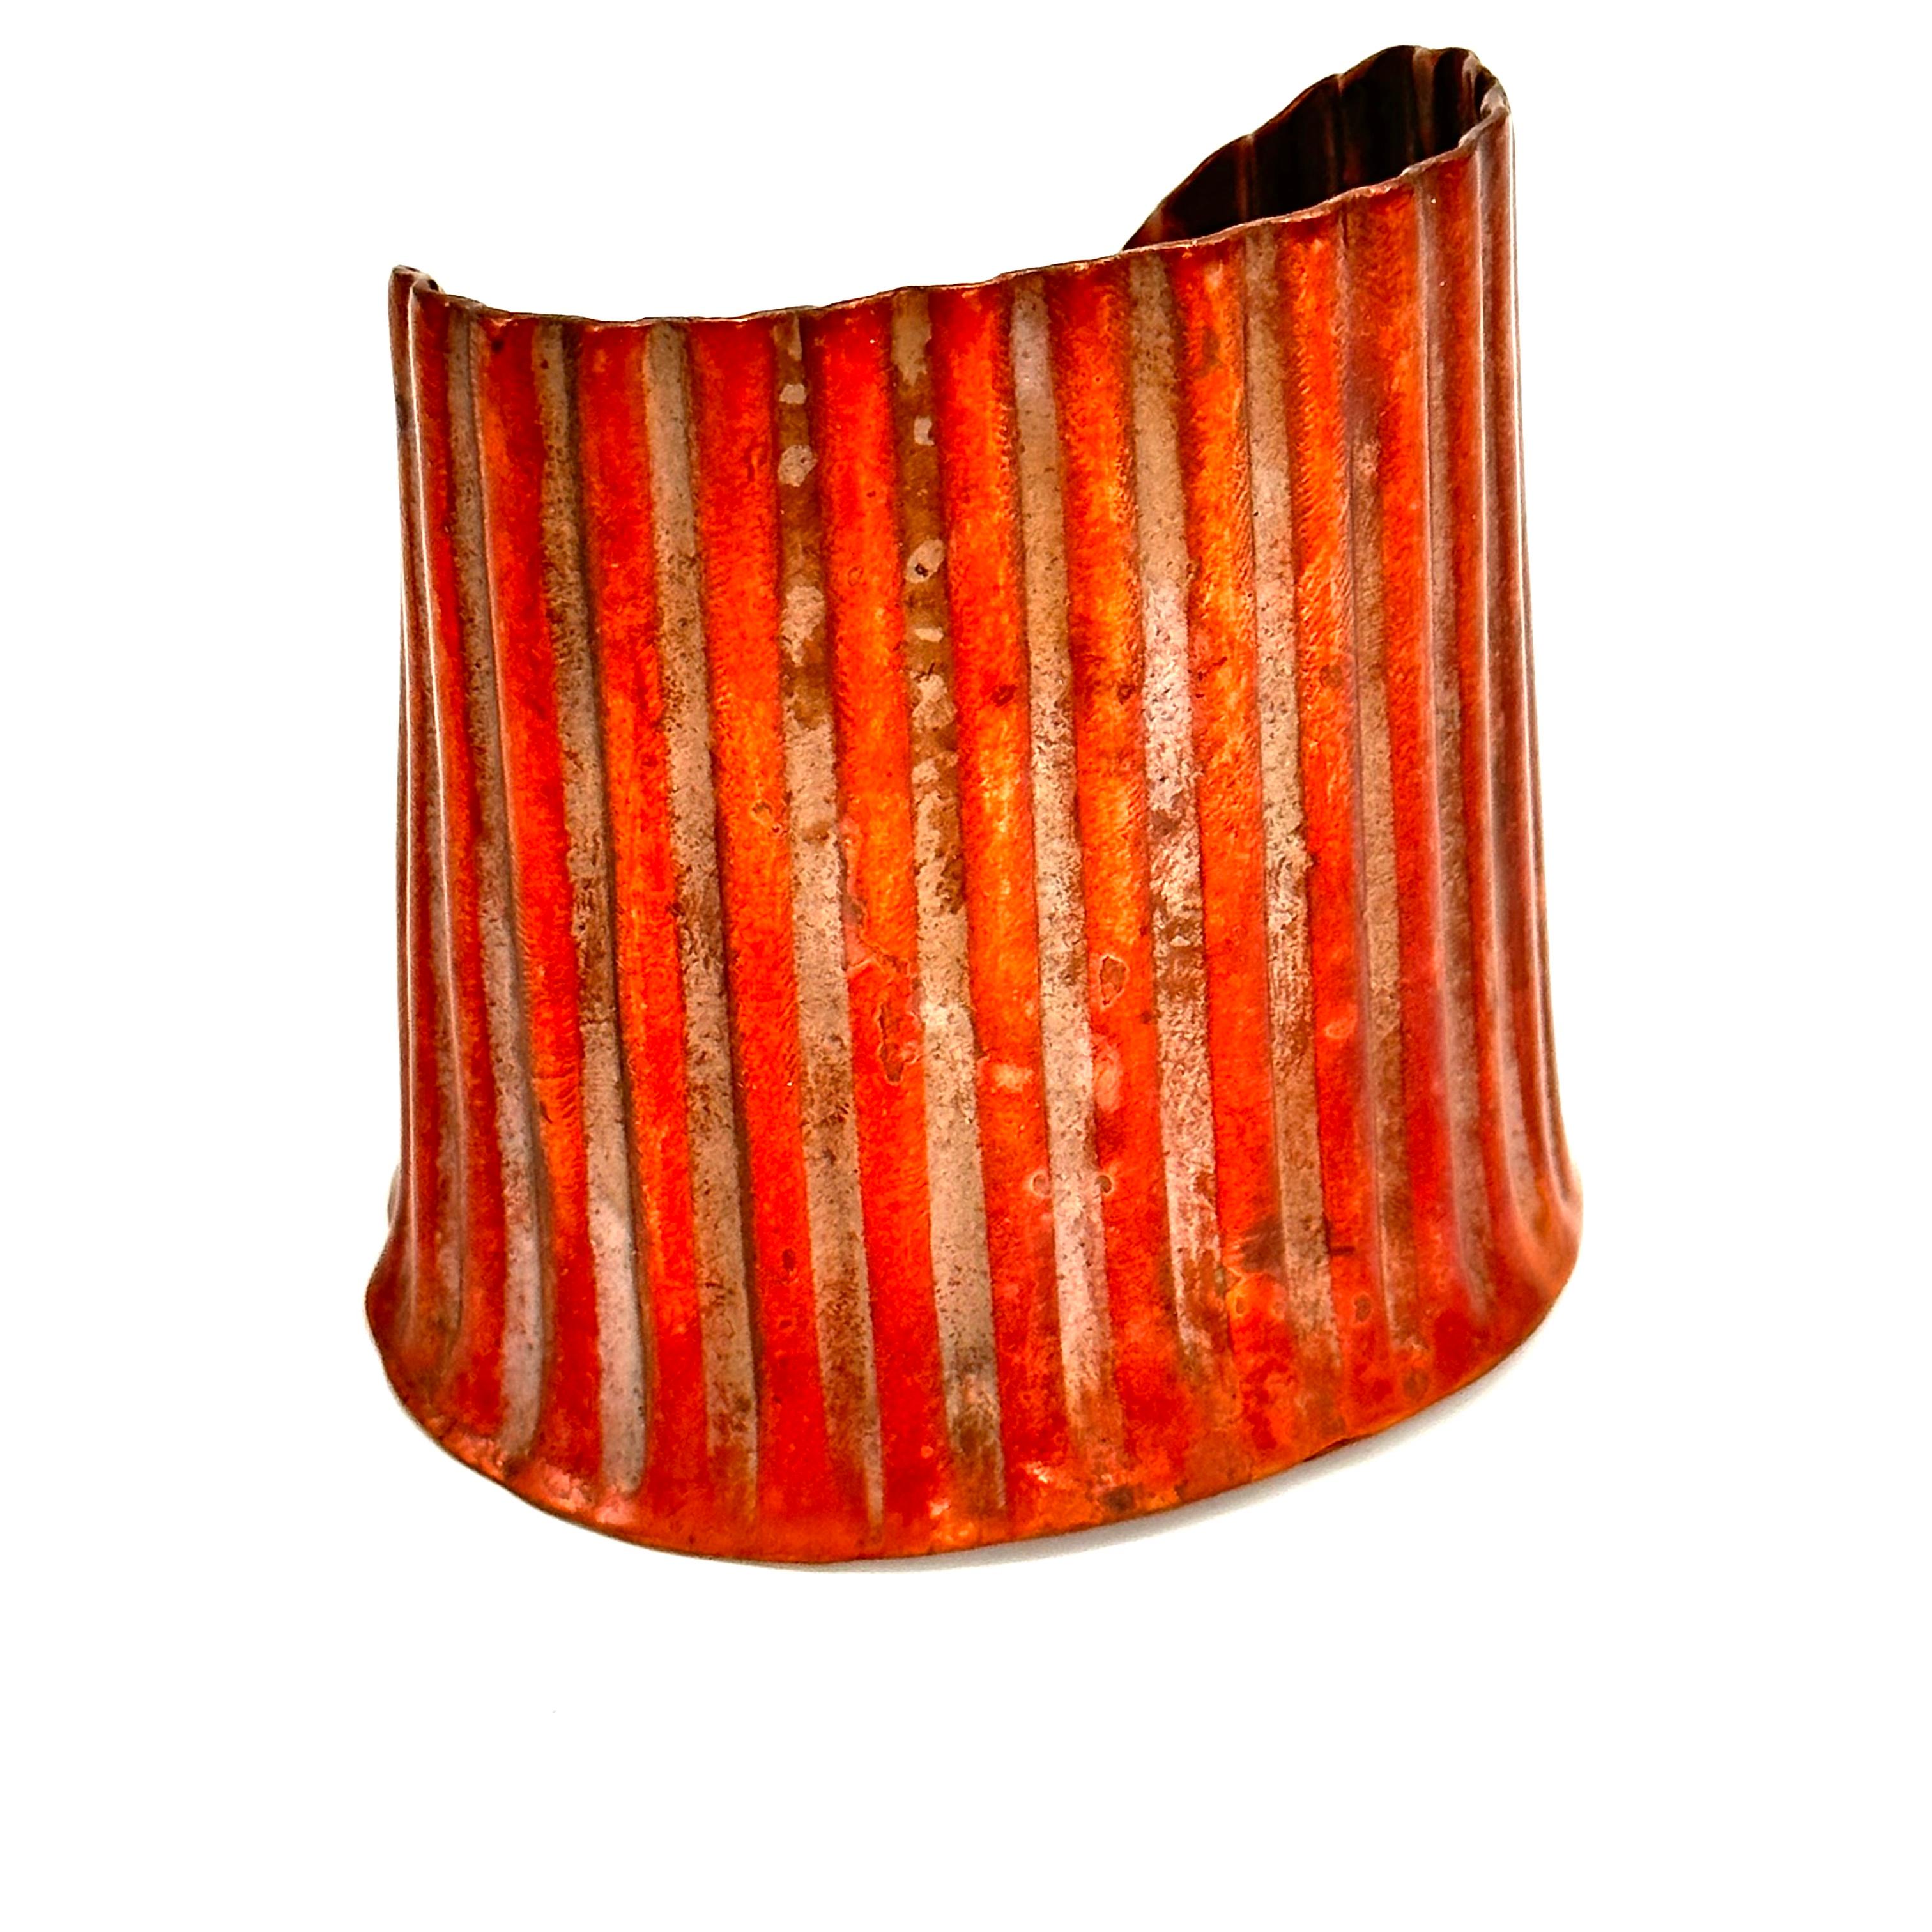 Robert Lee Morris Wabi Sabi Copper Column Cuff 1981 In Excellent Condition For Sale In New York, NY